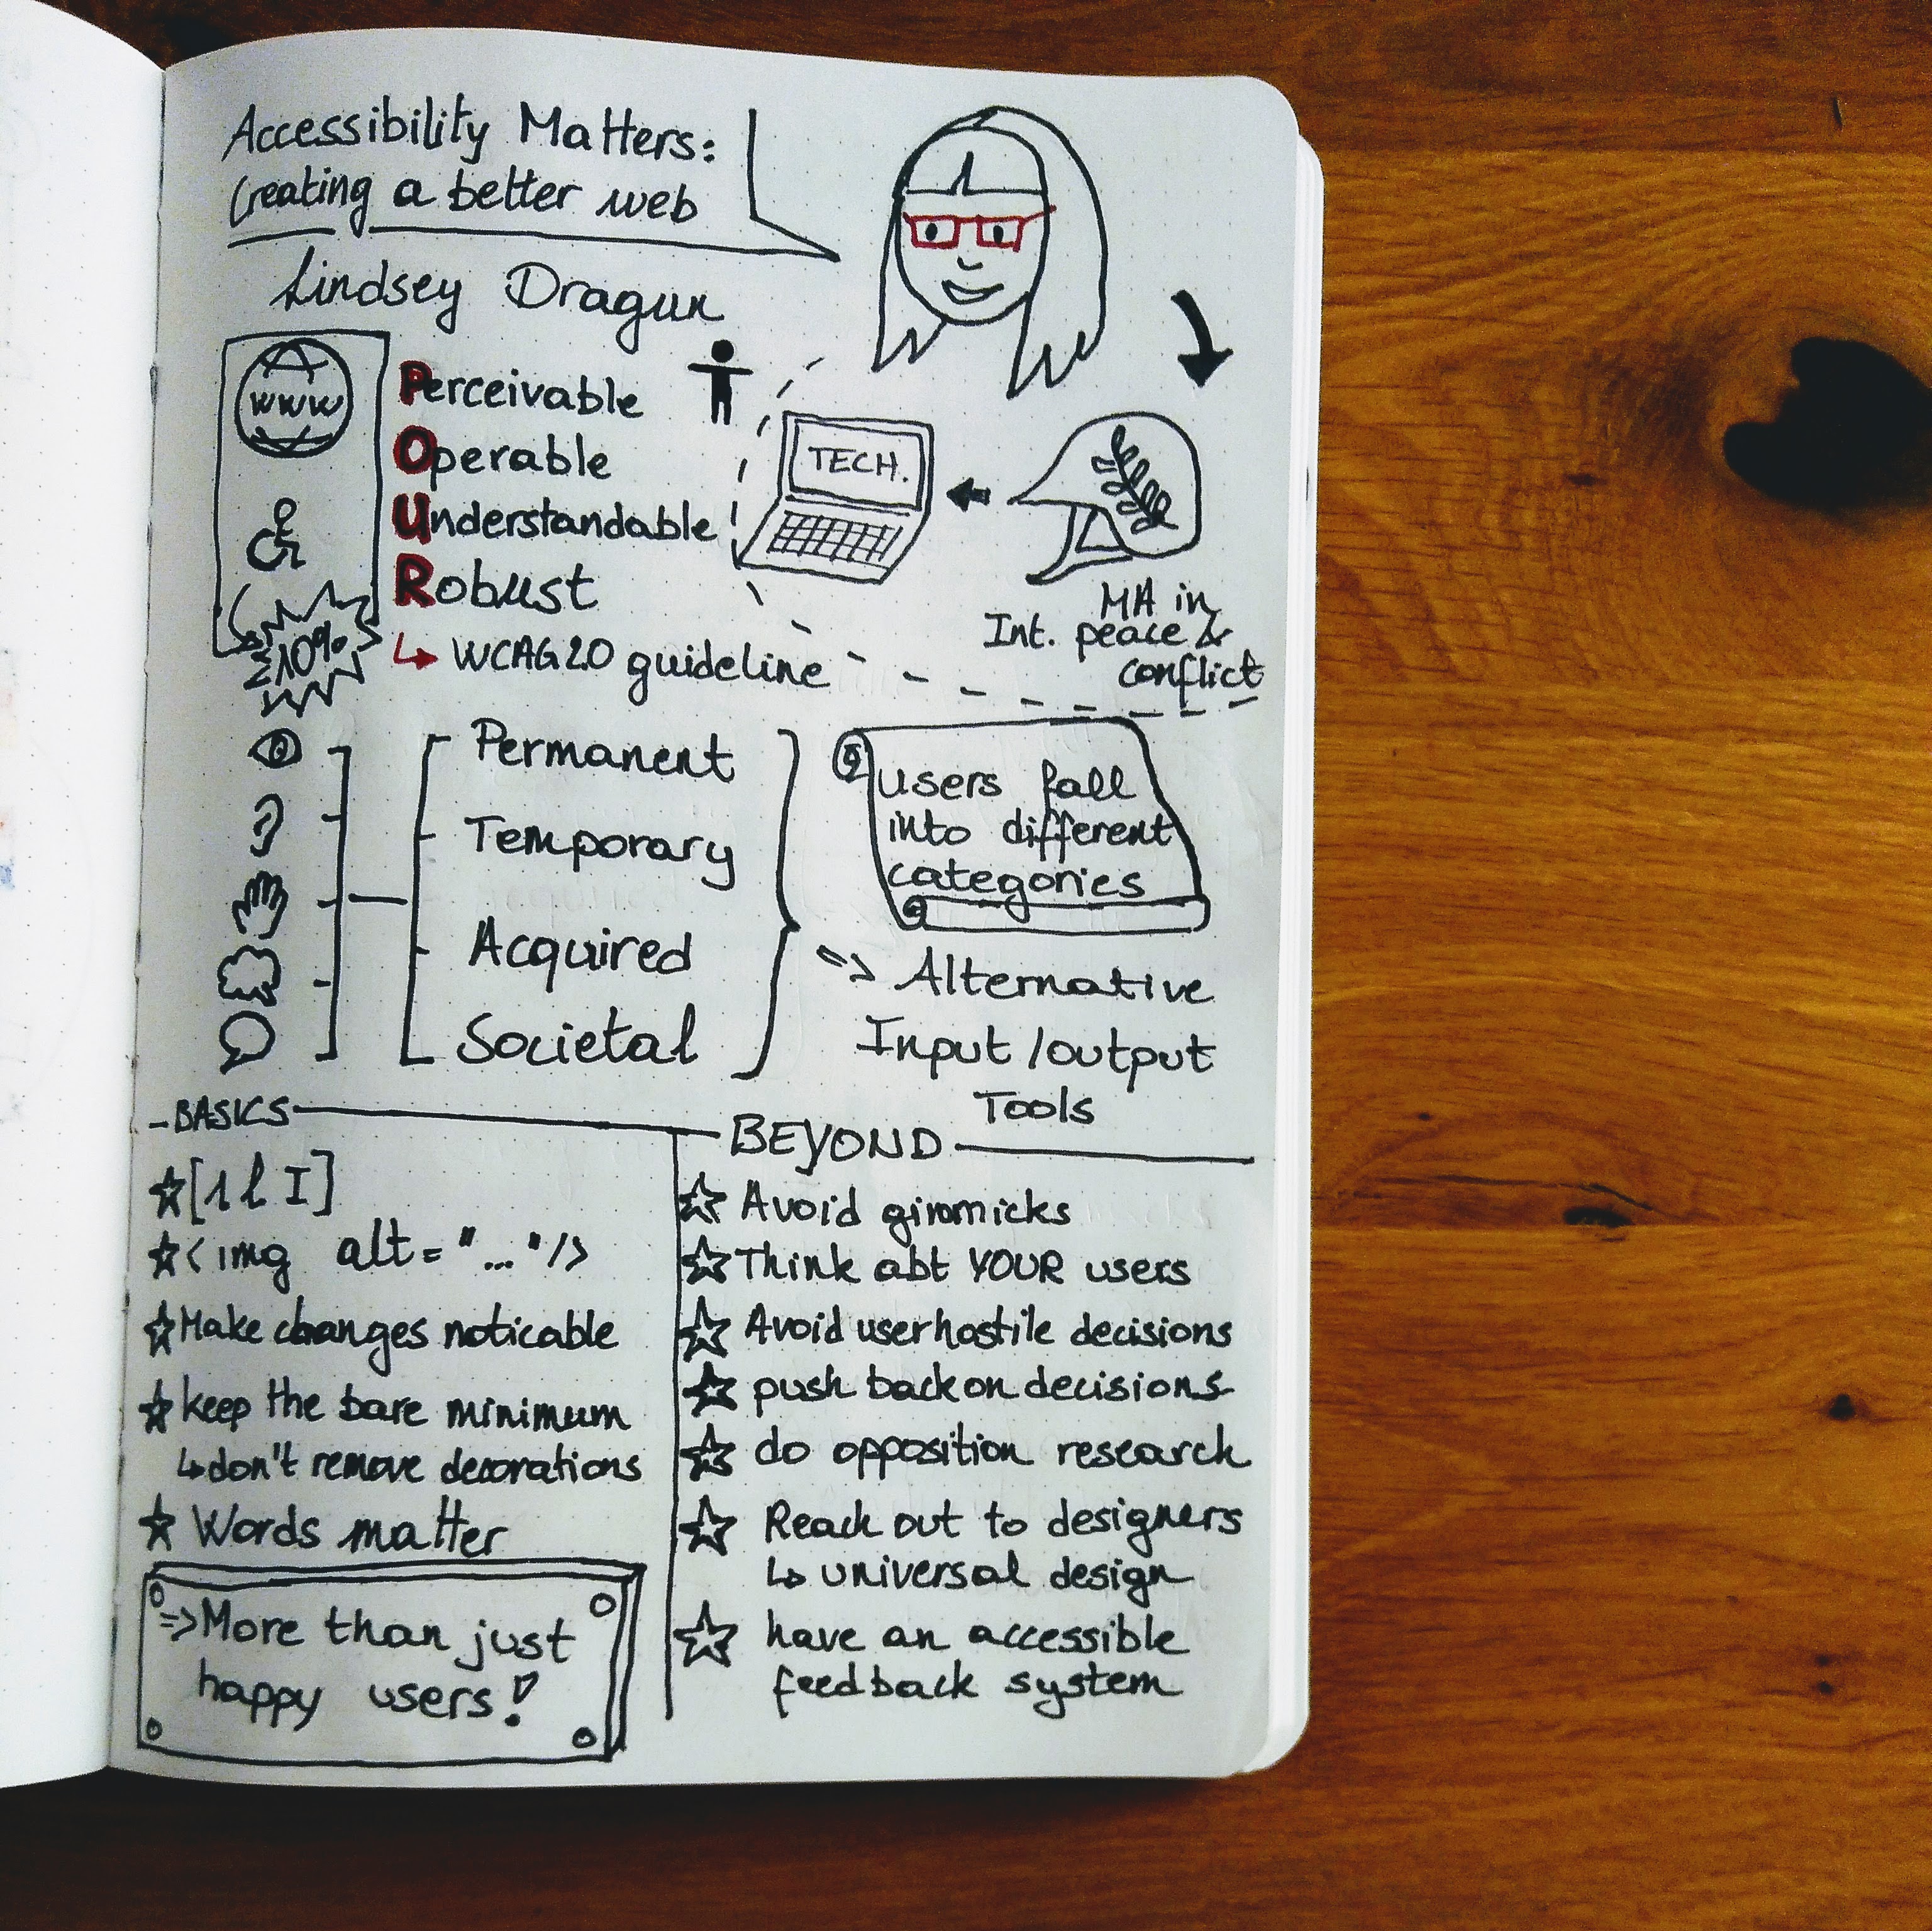 Sketchnote of Accessibility Matters: Creating a Better Web